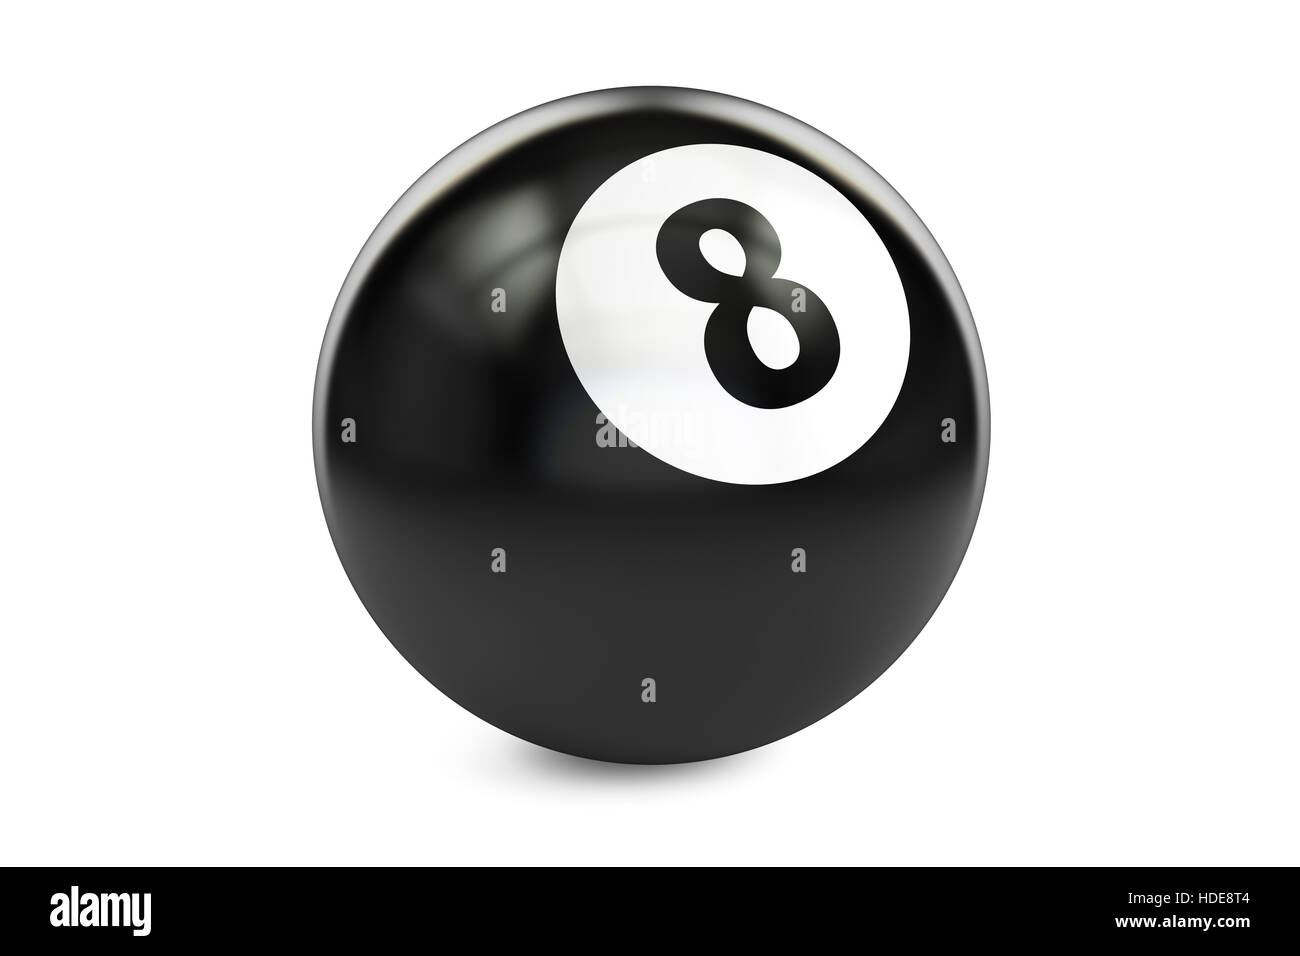 Billiard black eight ball, 3D rendering isolated on white background Stock Photo